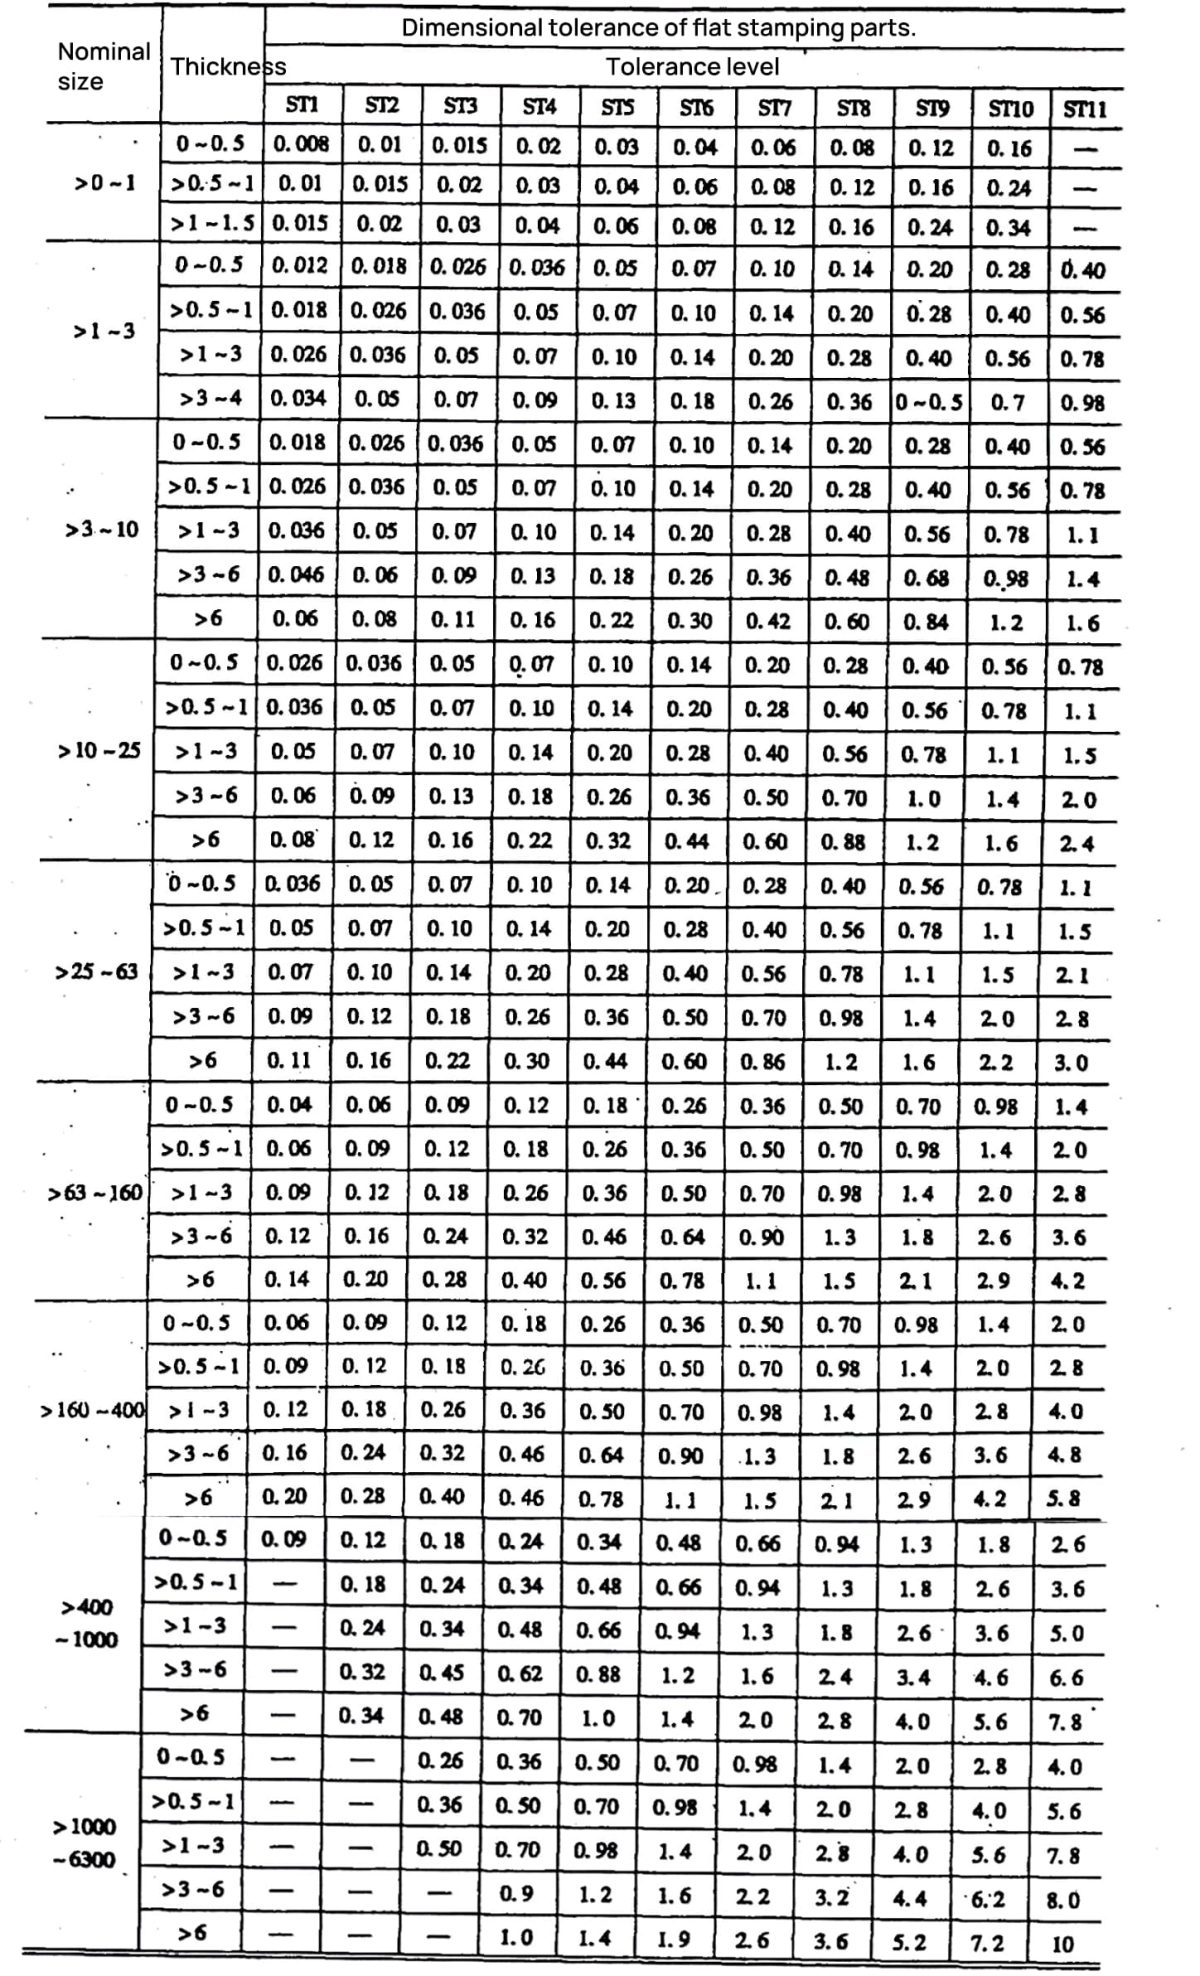 Dimensional tolerance table of flat stamping parts